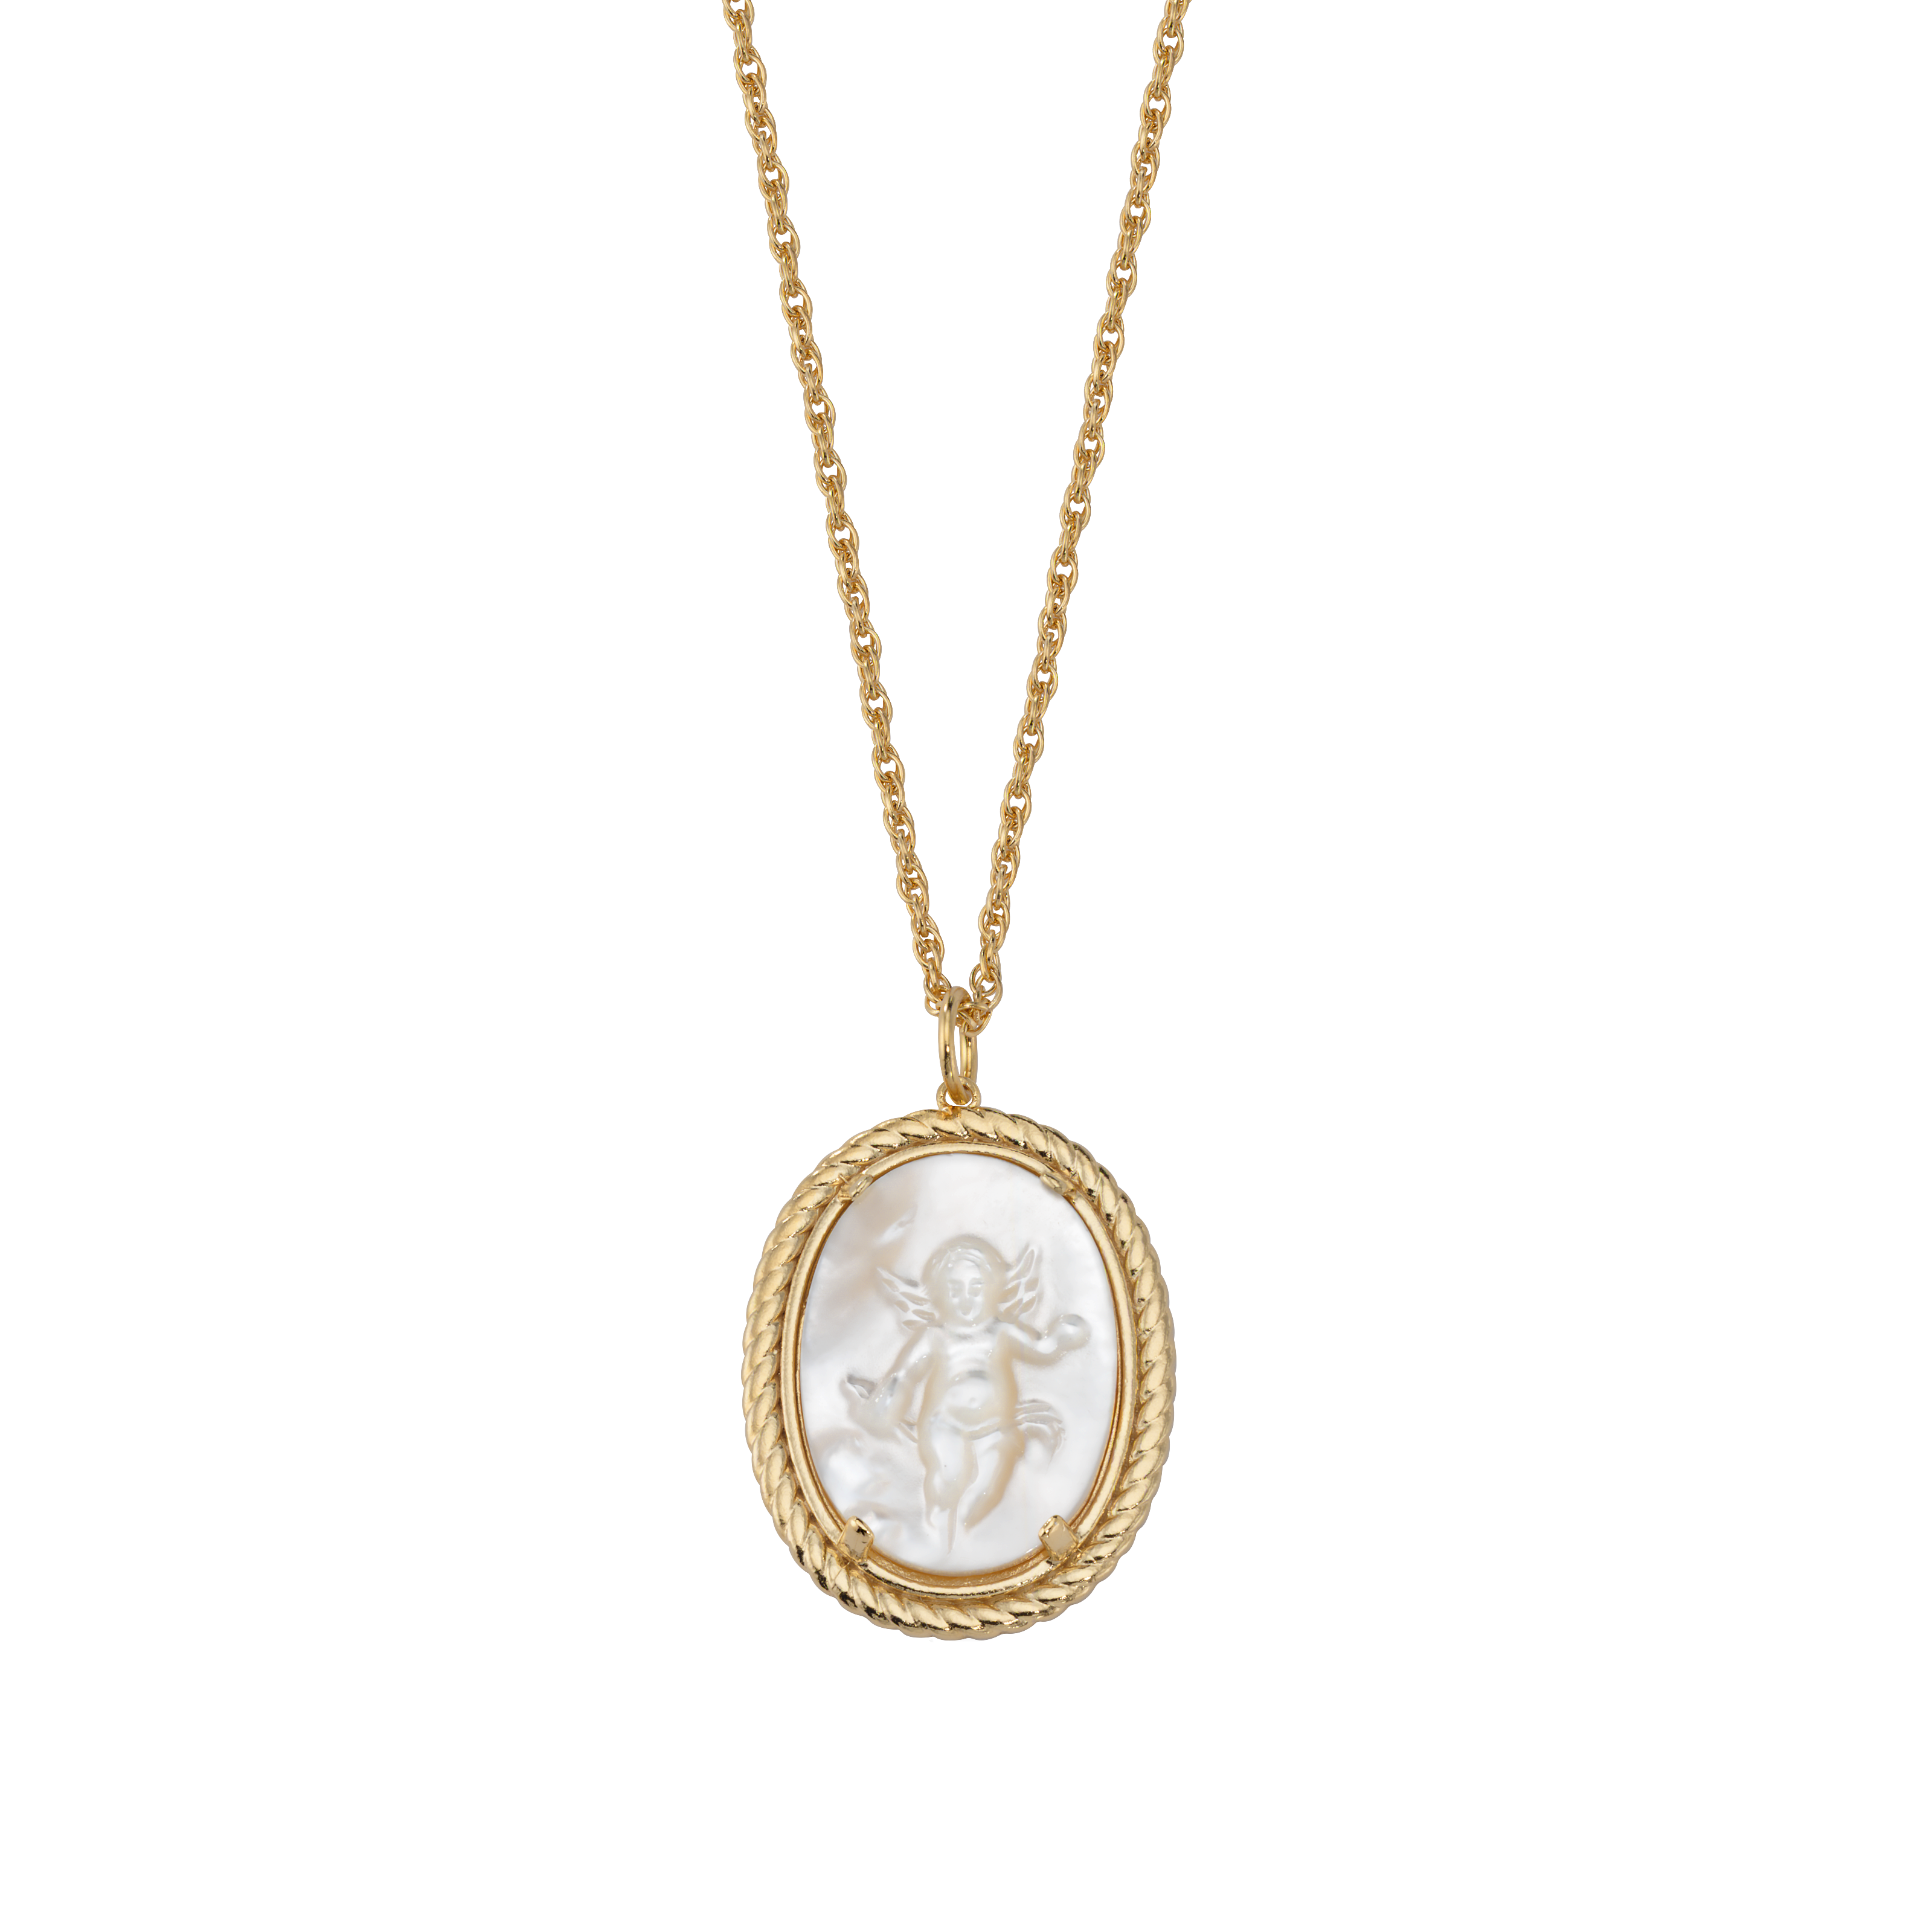 Gold Mother Of Pearl Cameo Pendant Necklace For Women Lucky Sonny Collar  With Virgin Mary Design Fashionable Brasil Joyeria Colar Feminina From  Dunqiu, $16.45